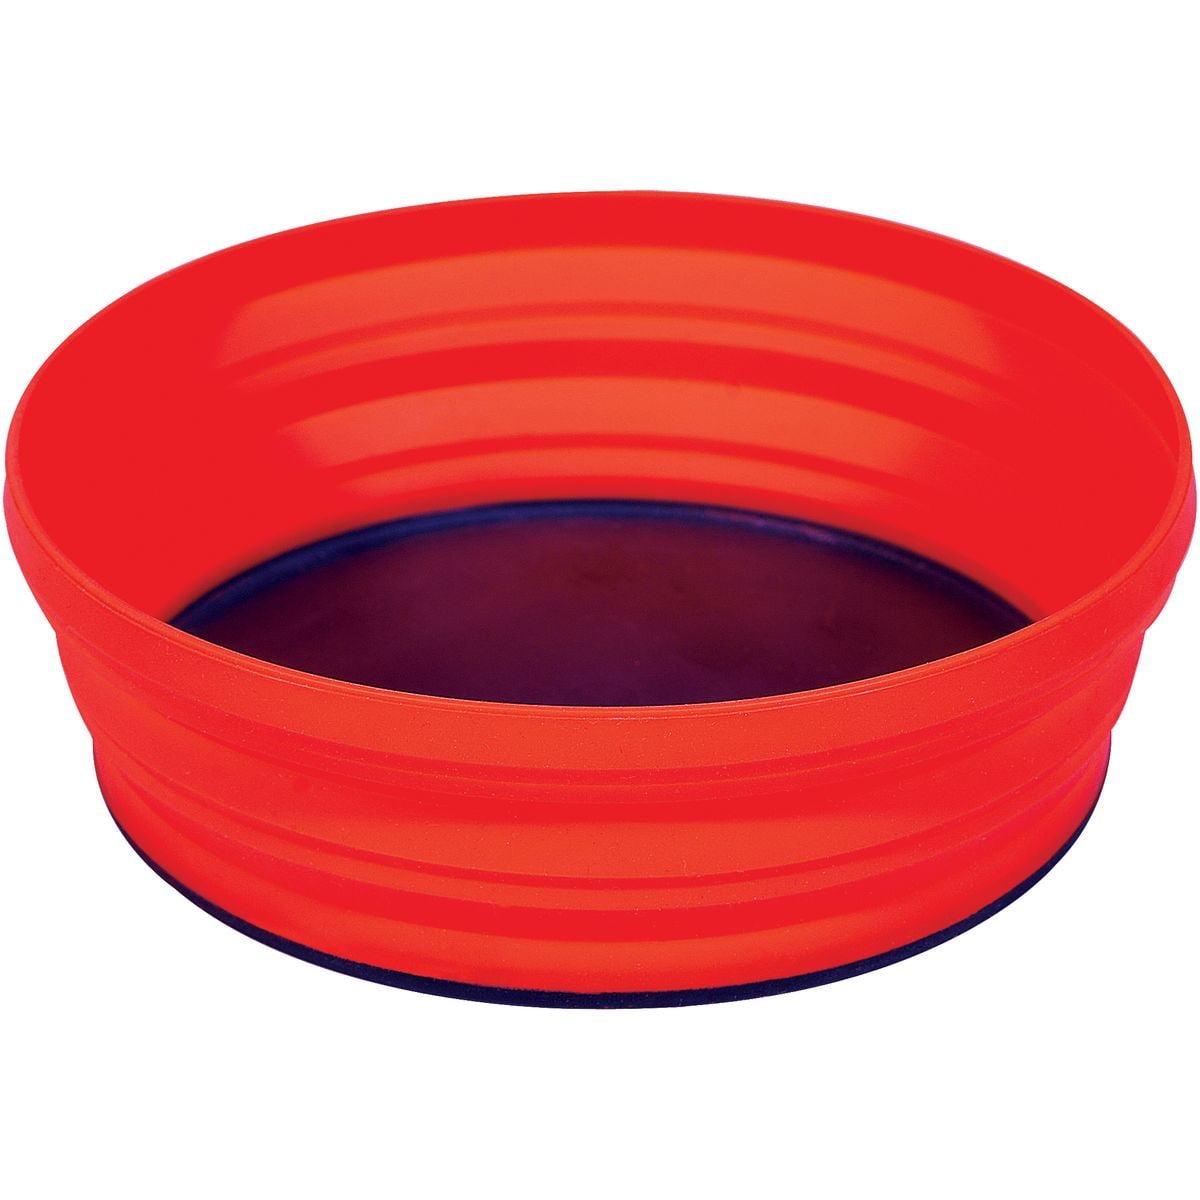 Sea To Summit XL Collapsible Bowl